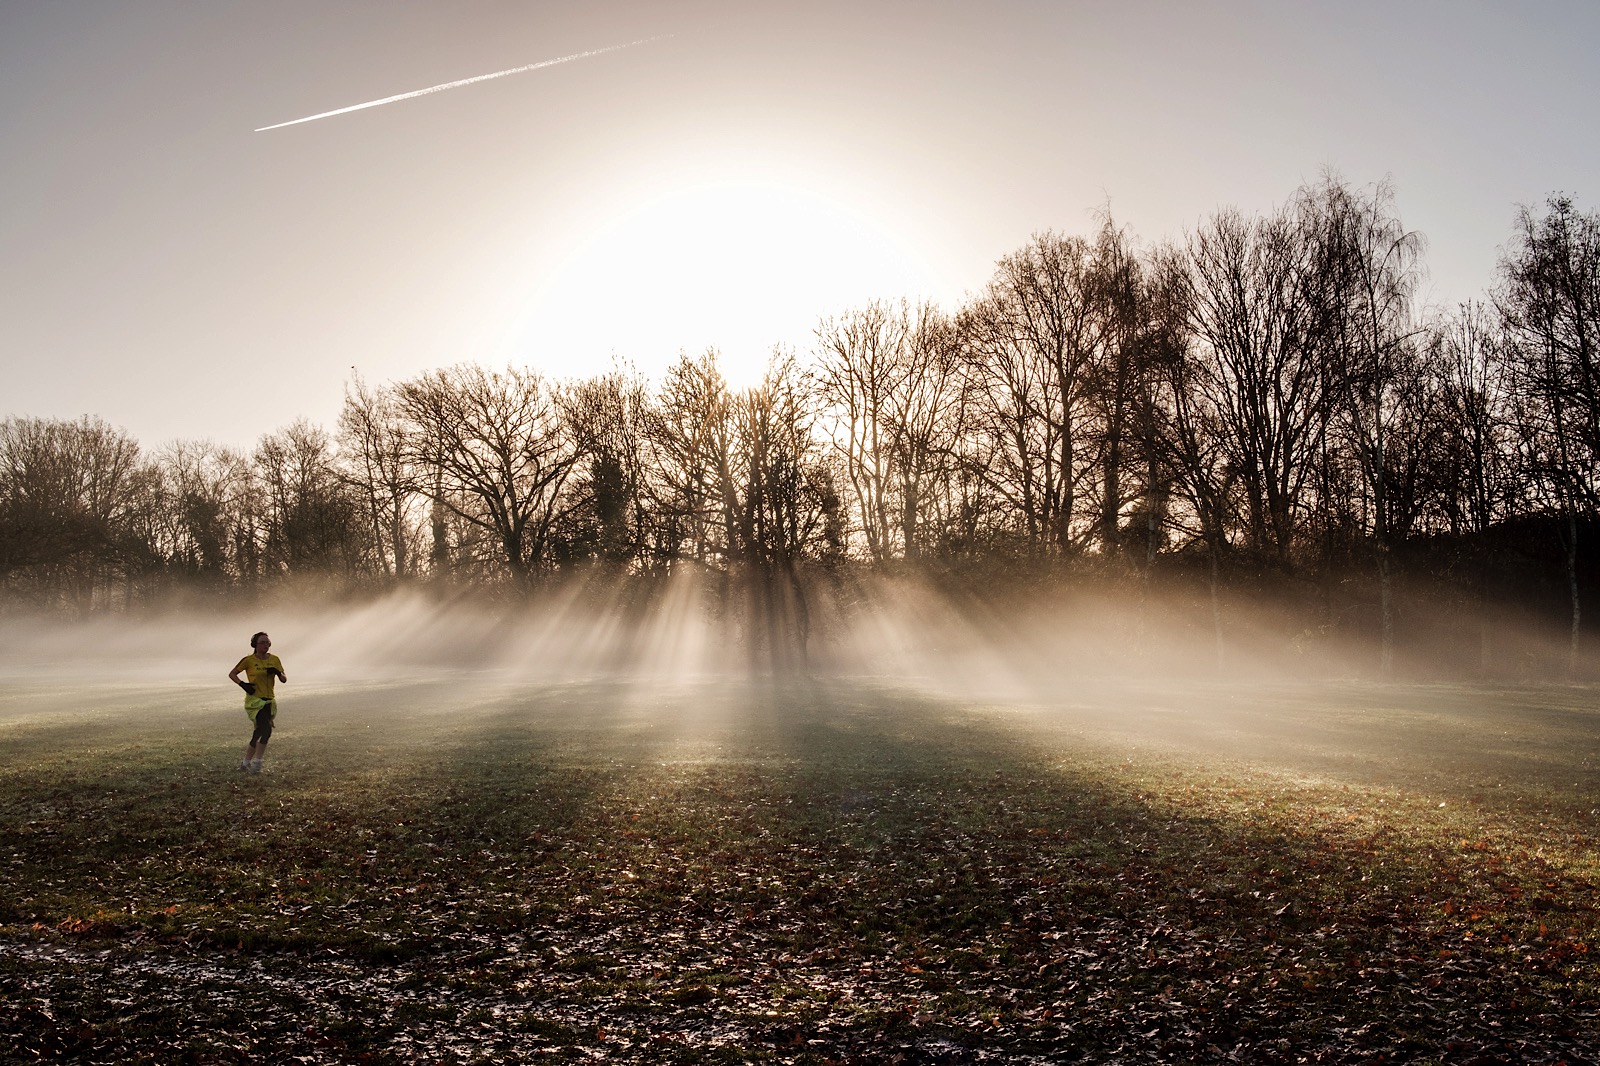 Misty morning in a South London park with a silhouette of a woman running